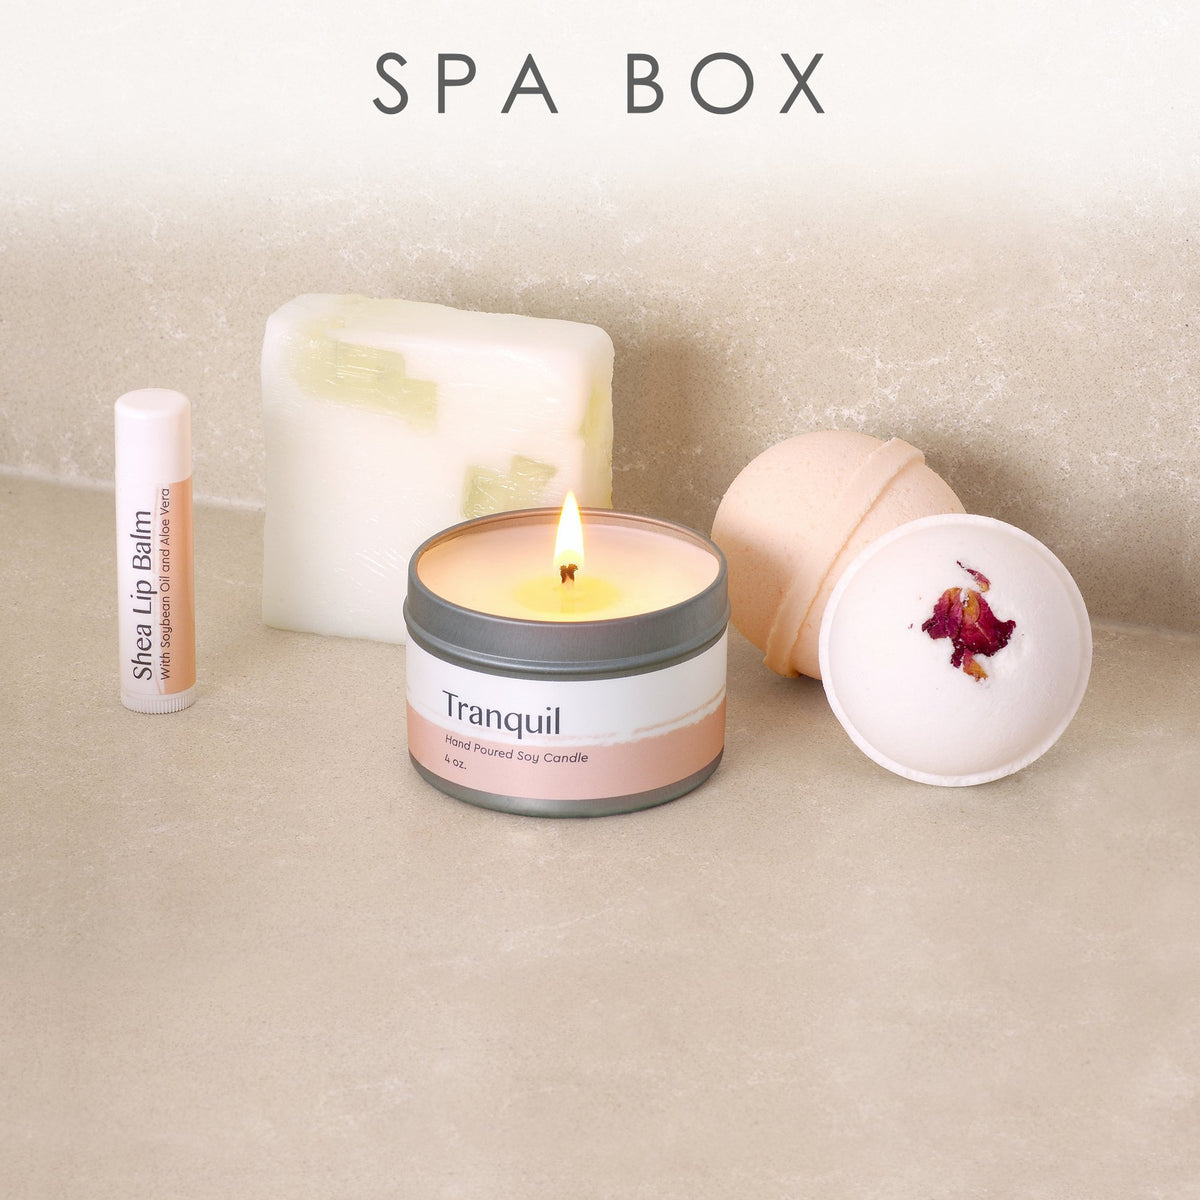 Daughter-In-Law Spa Gift Box